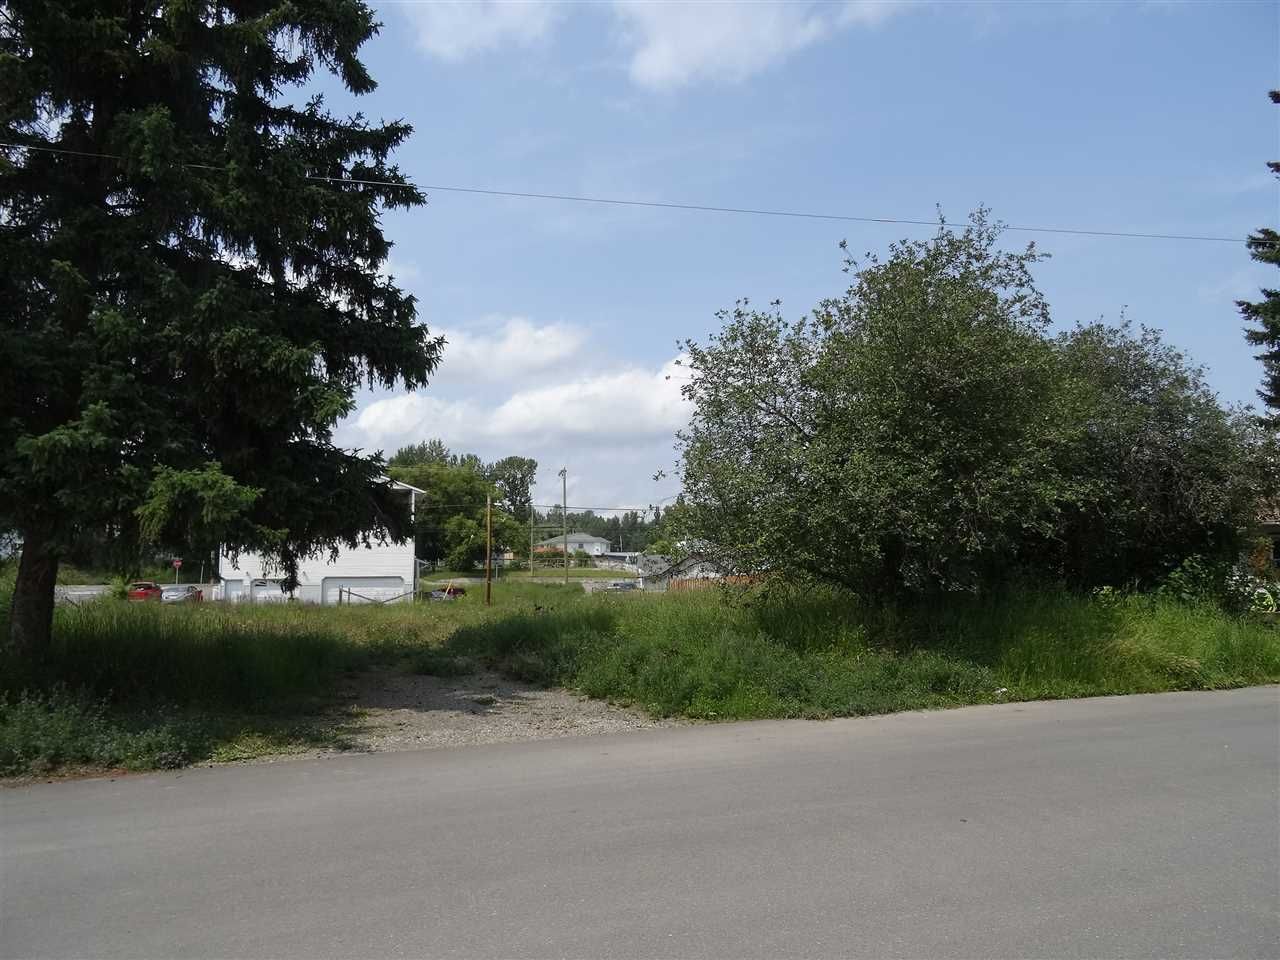 Main Photo: 577 WILLIS STREET in : Quesnel - Town Land for sale : MLS®# R2386031